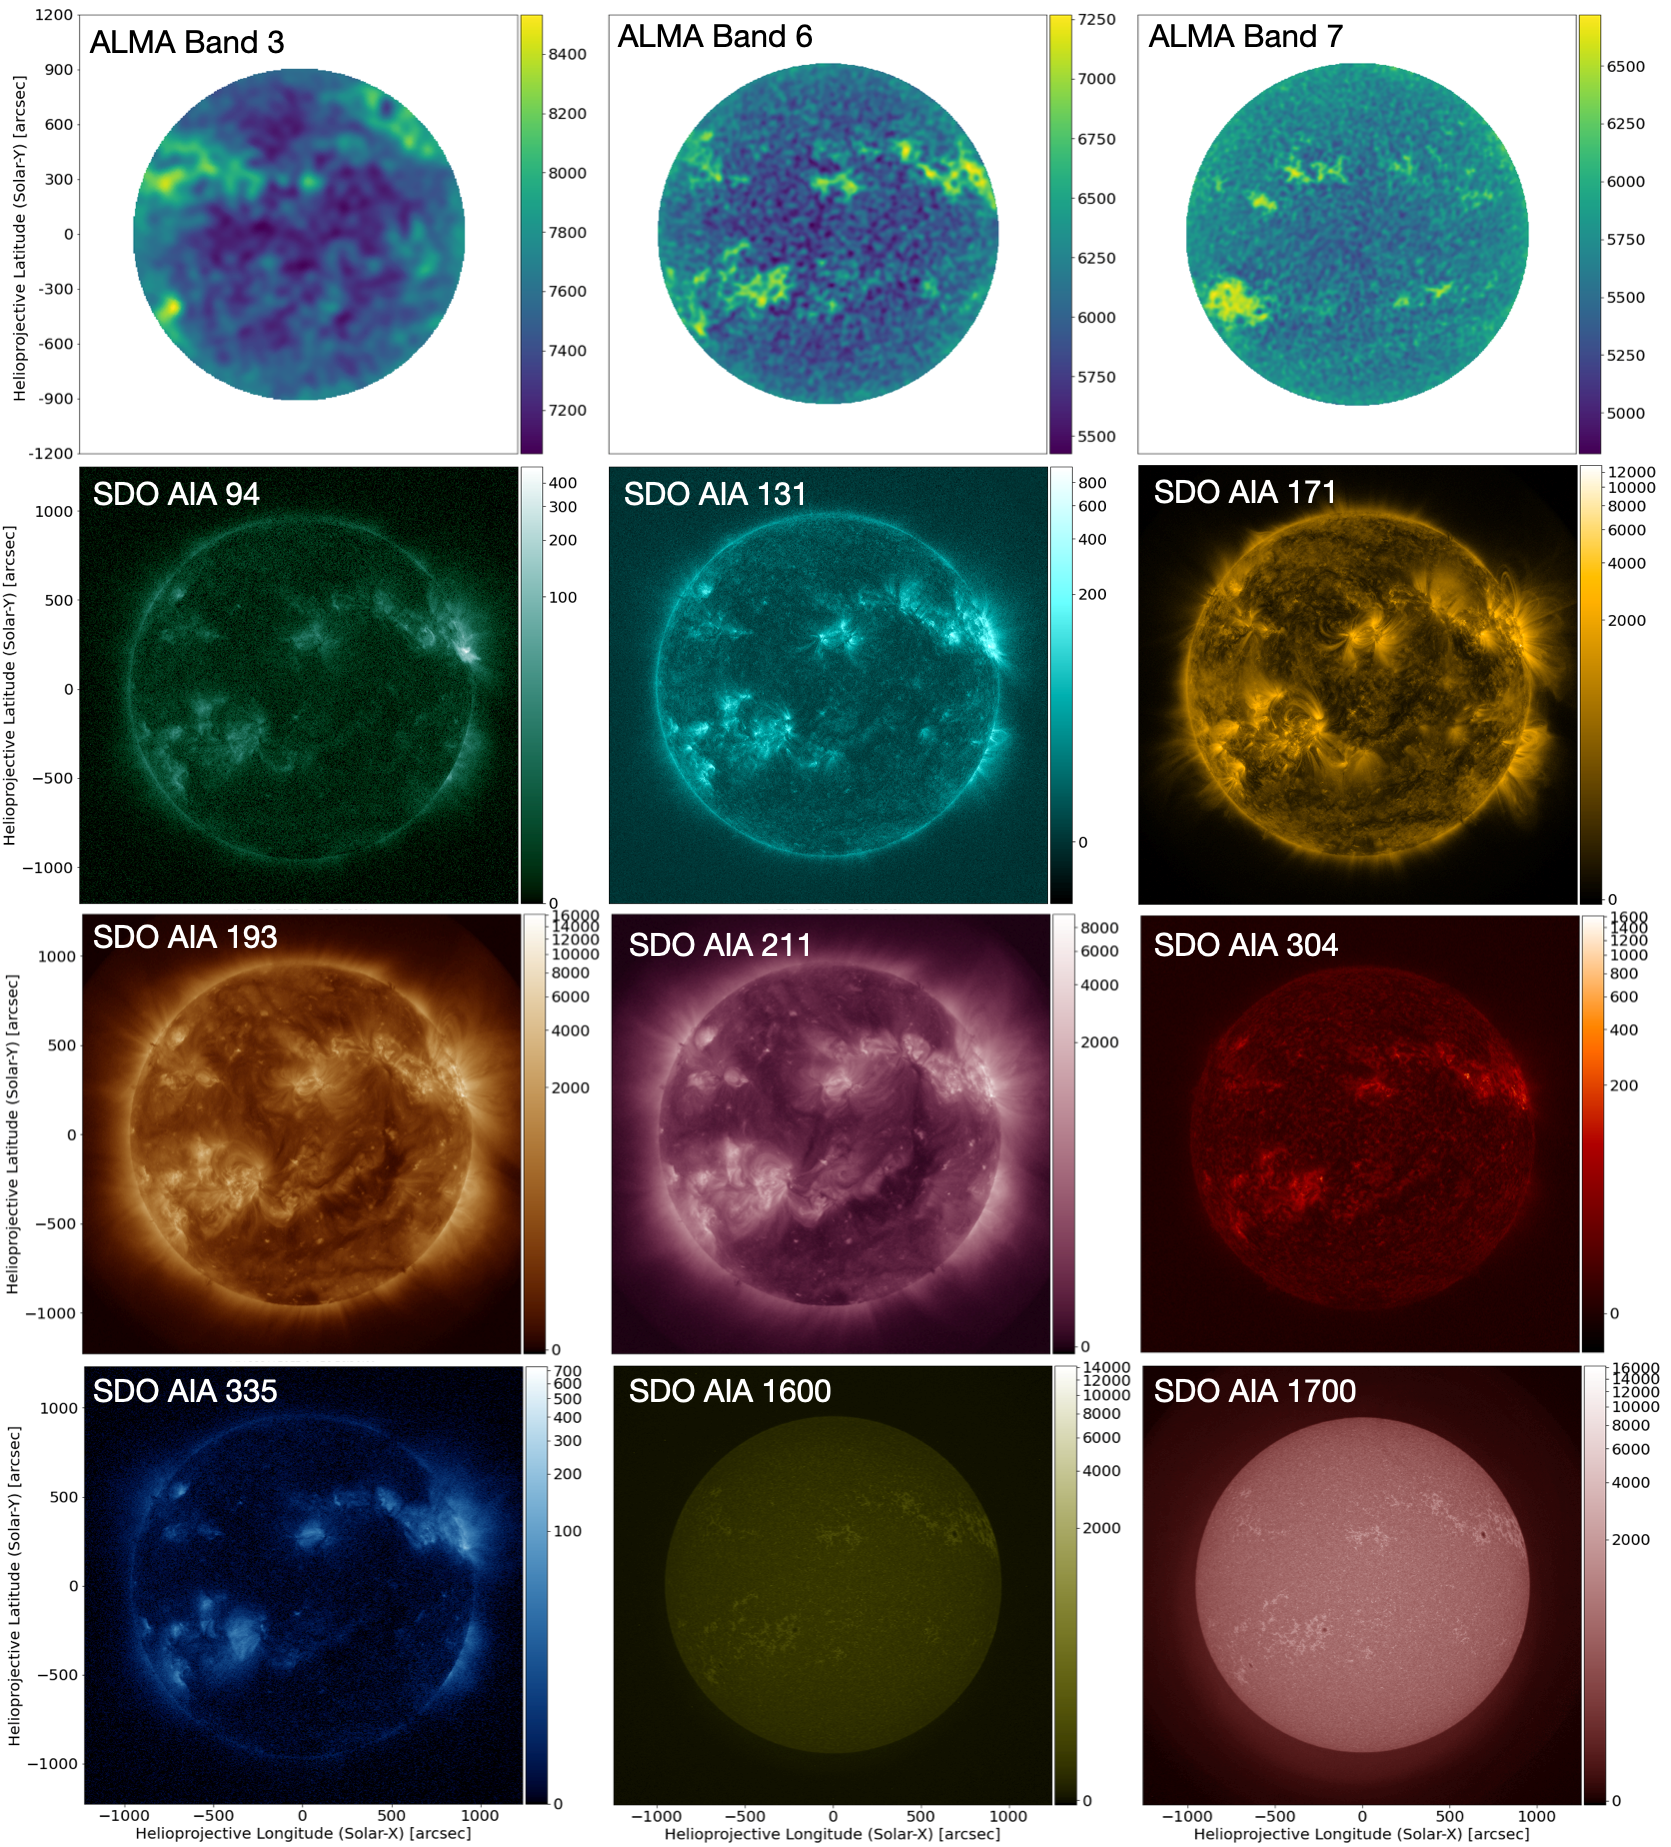 Full disk observations of the solar atmosphere